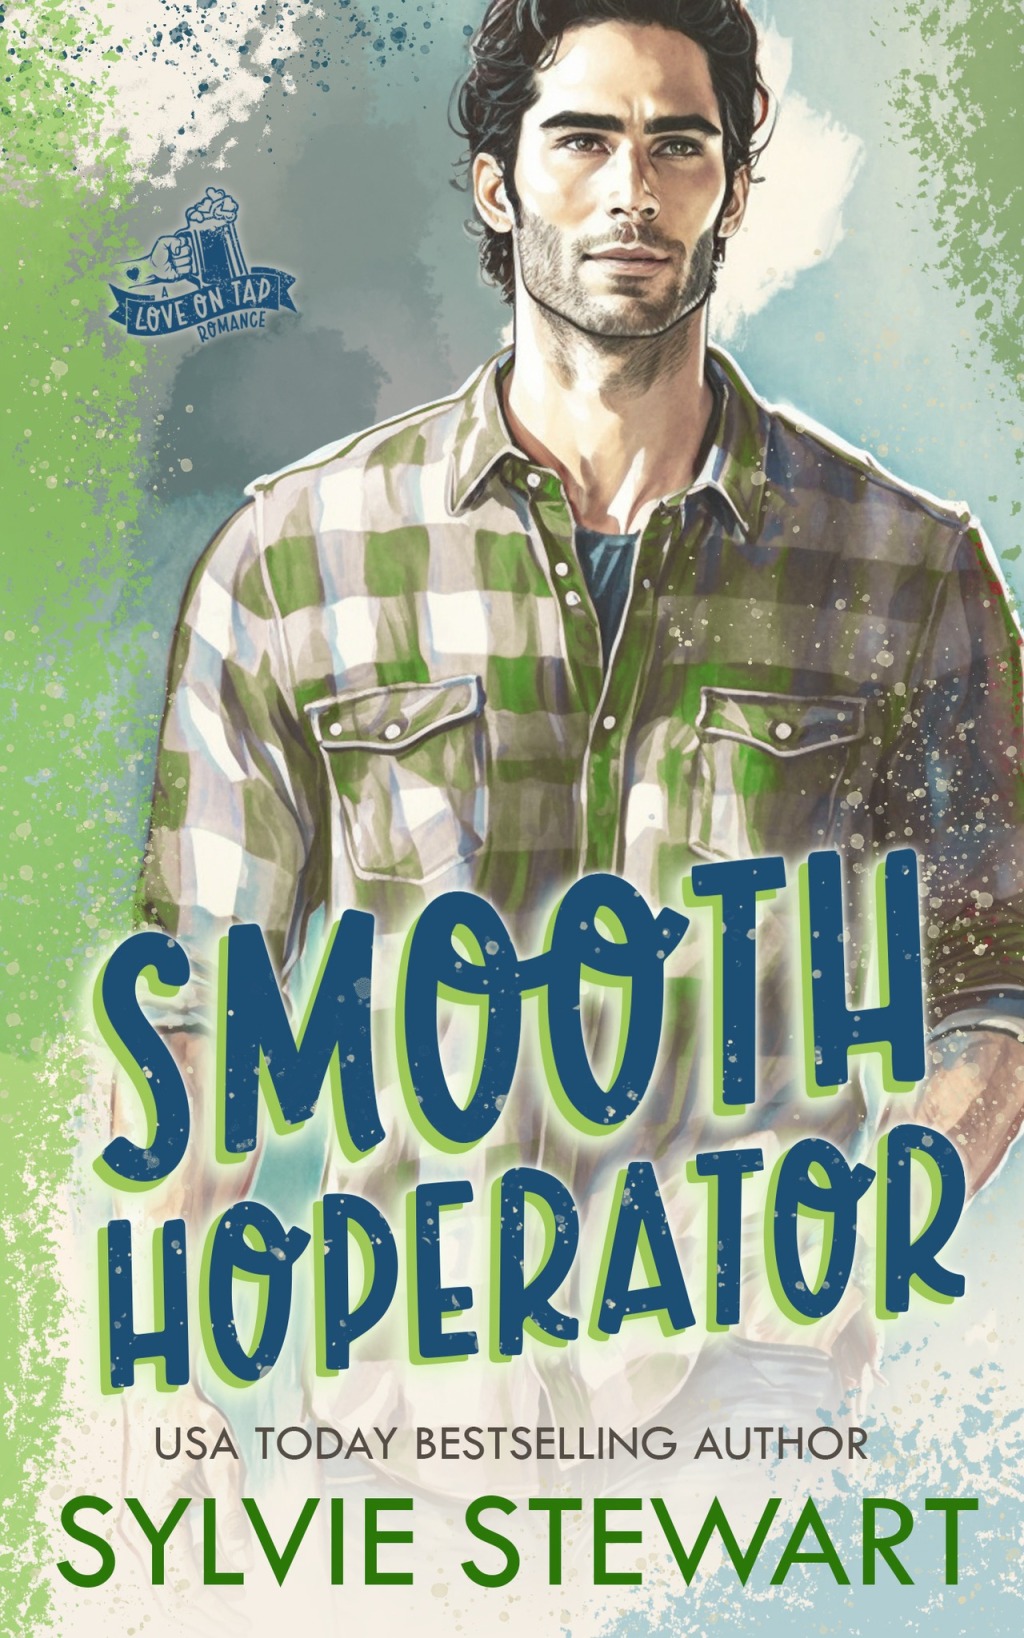 ARC REVIEW: SMOOTH HOPERATOR #2 IN LOVE ON TAP SERIES BY SYLVIE STEWART